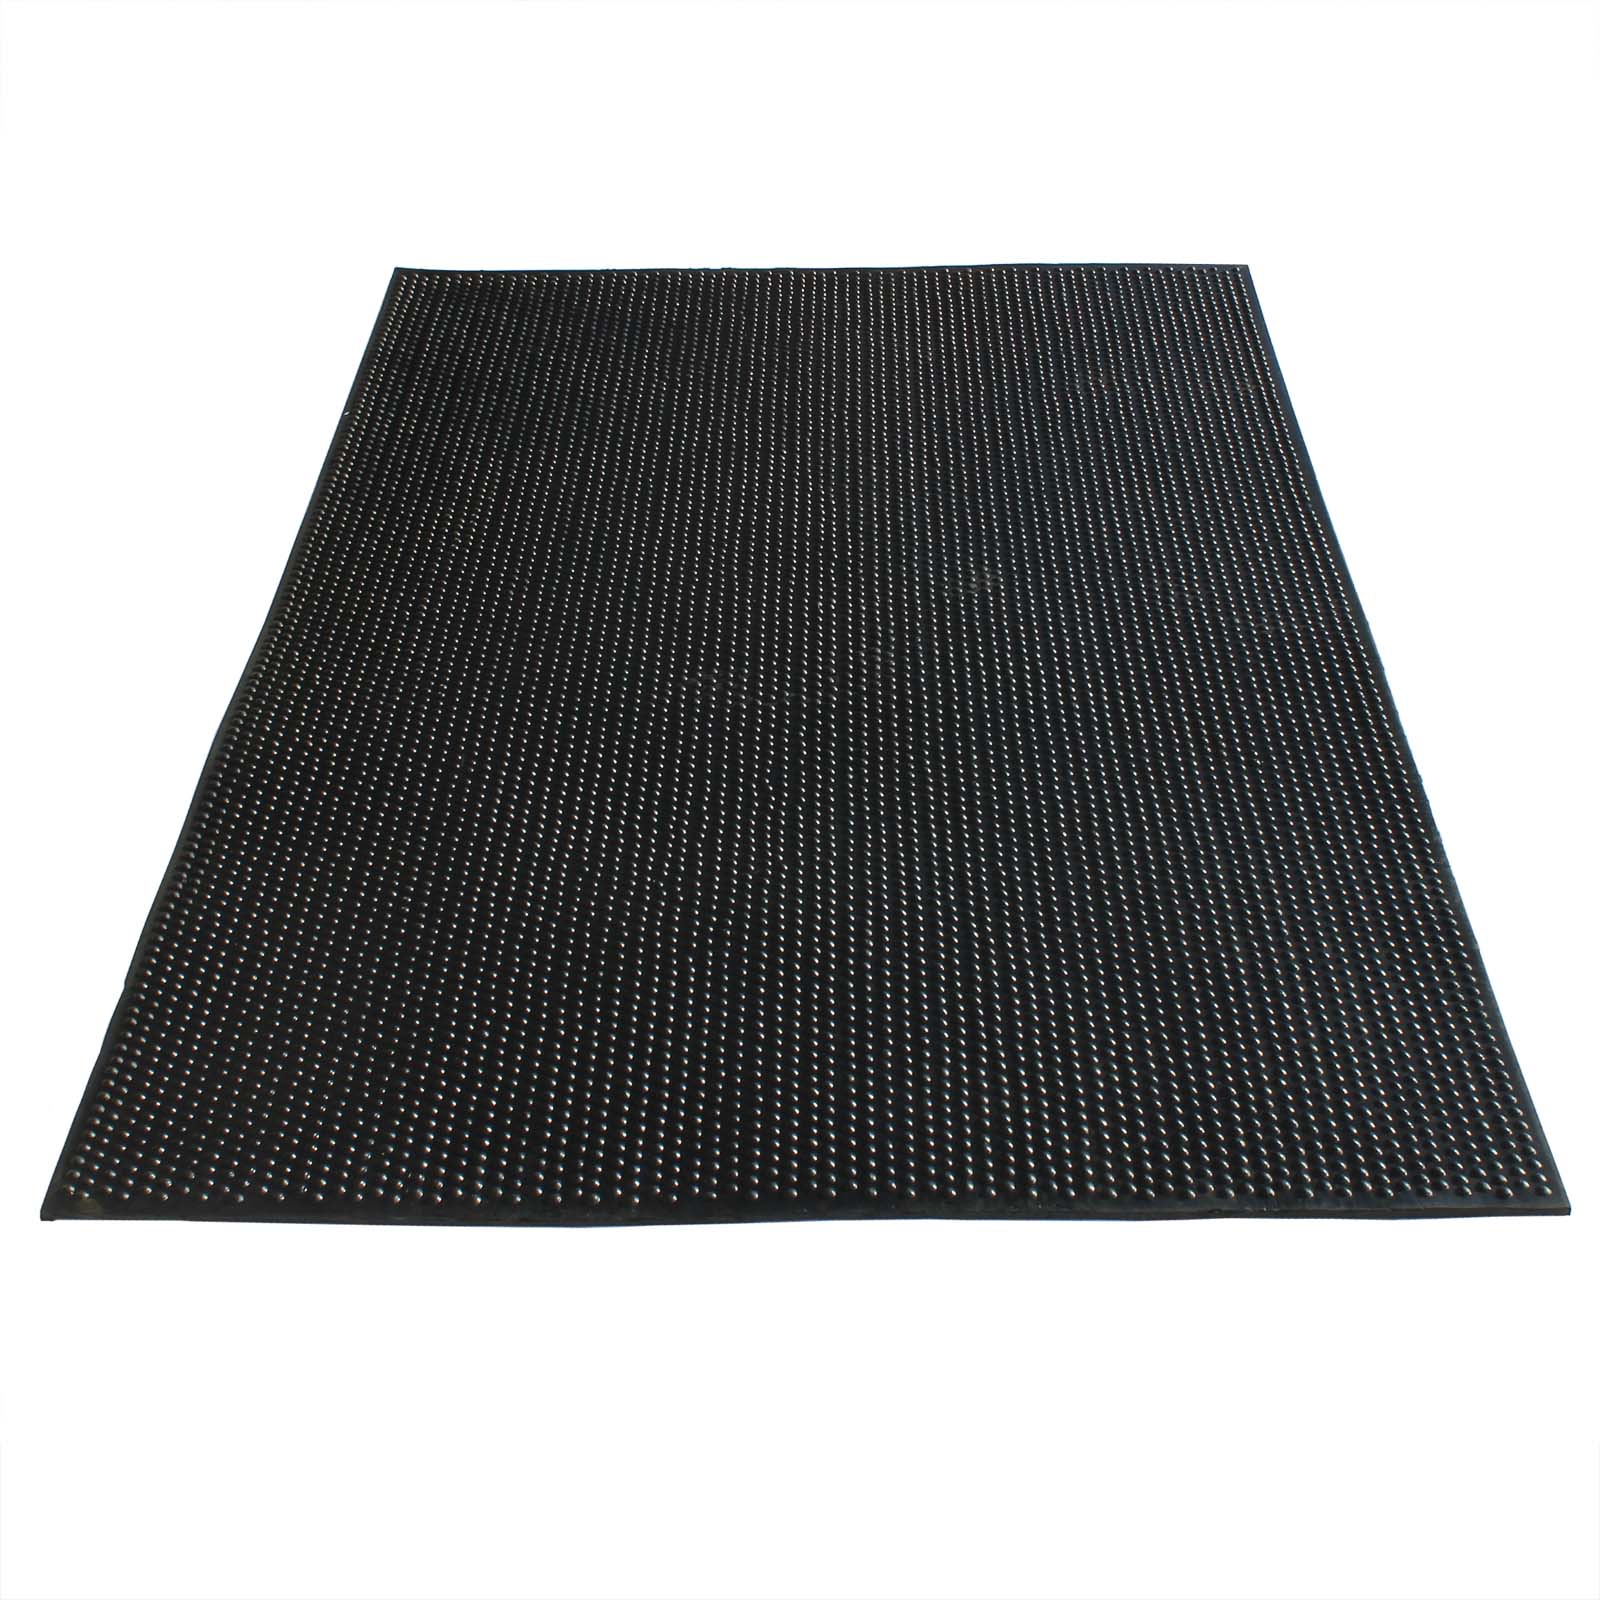 Rubber Gym Mats Heavy Duty Large Commercial Flooring 10mm Thick 6 X 4 Easimat Easimat